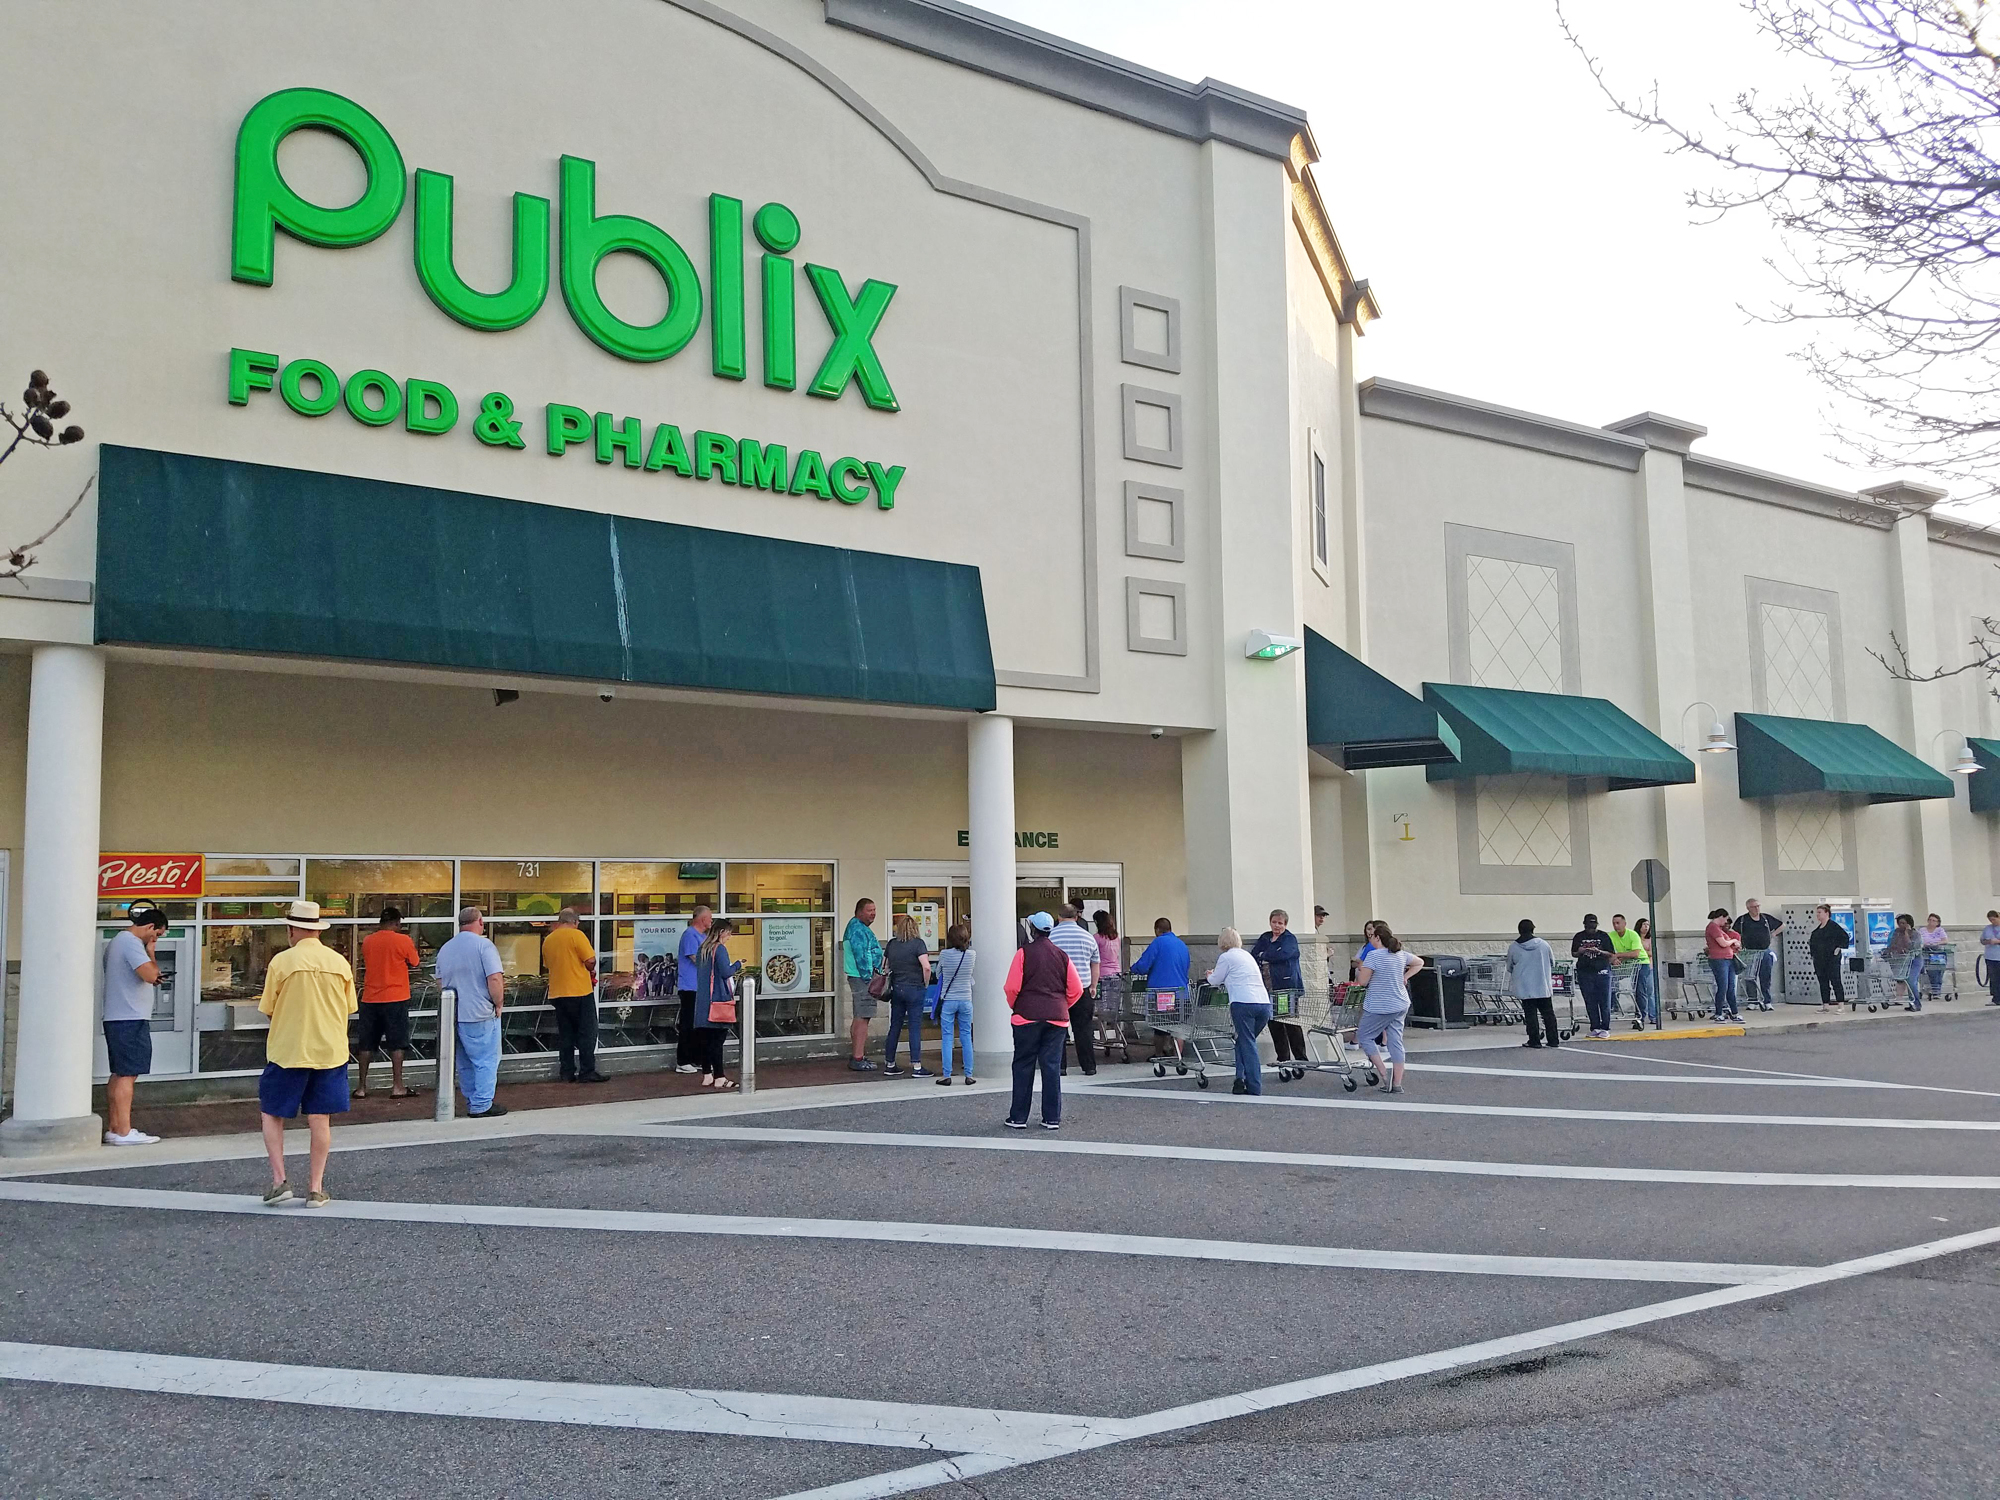 People line up to shop at Publix, which reduced hours because of COVID-19.